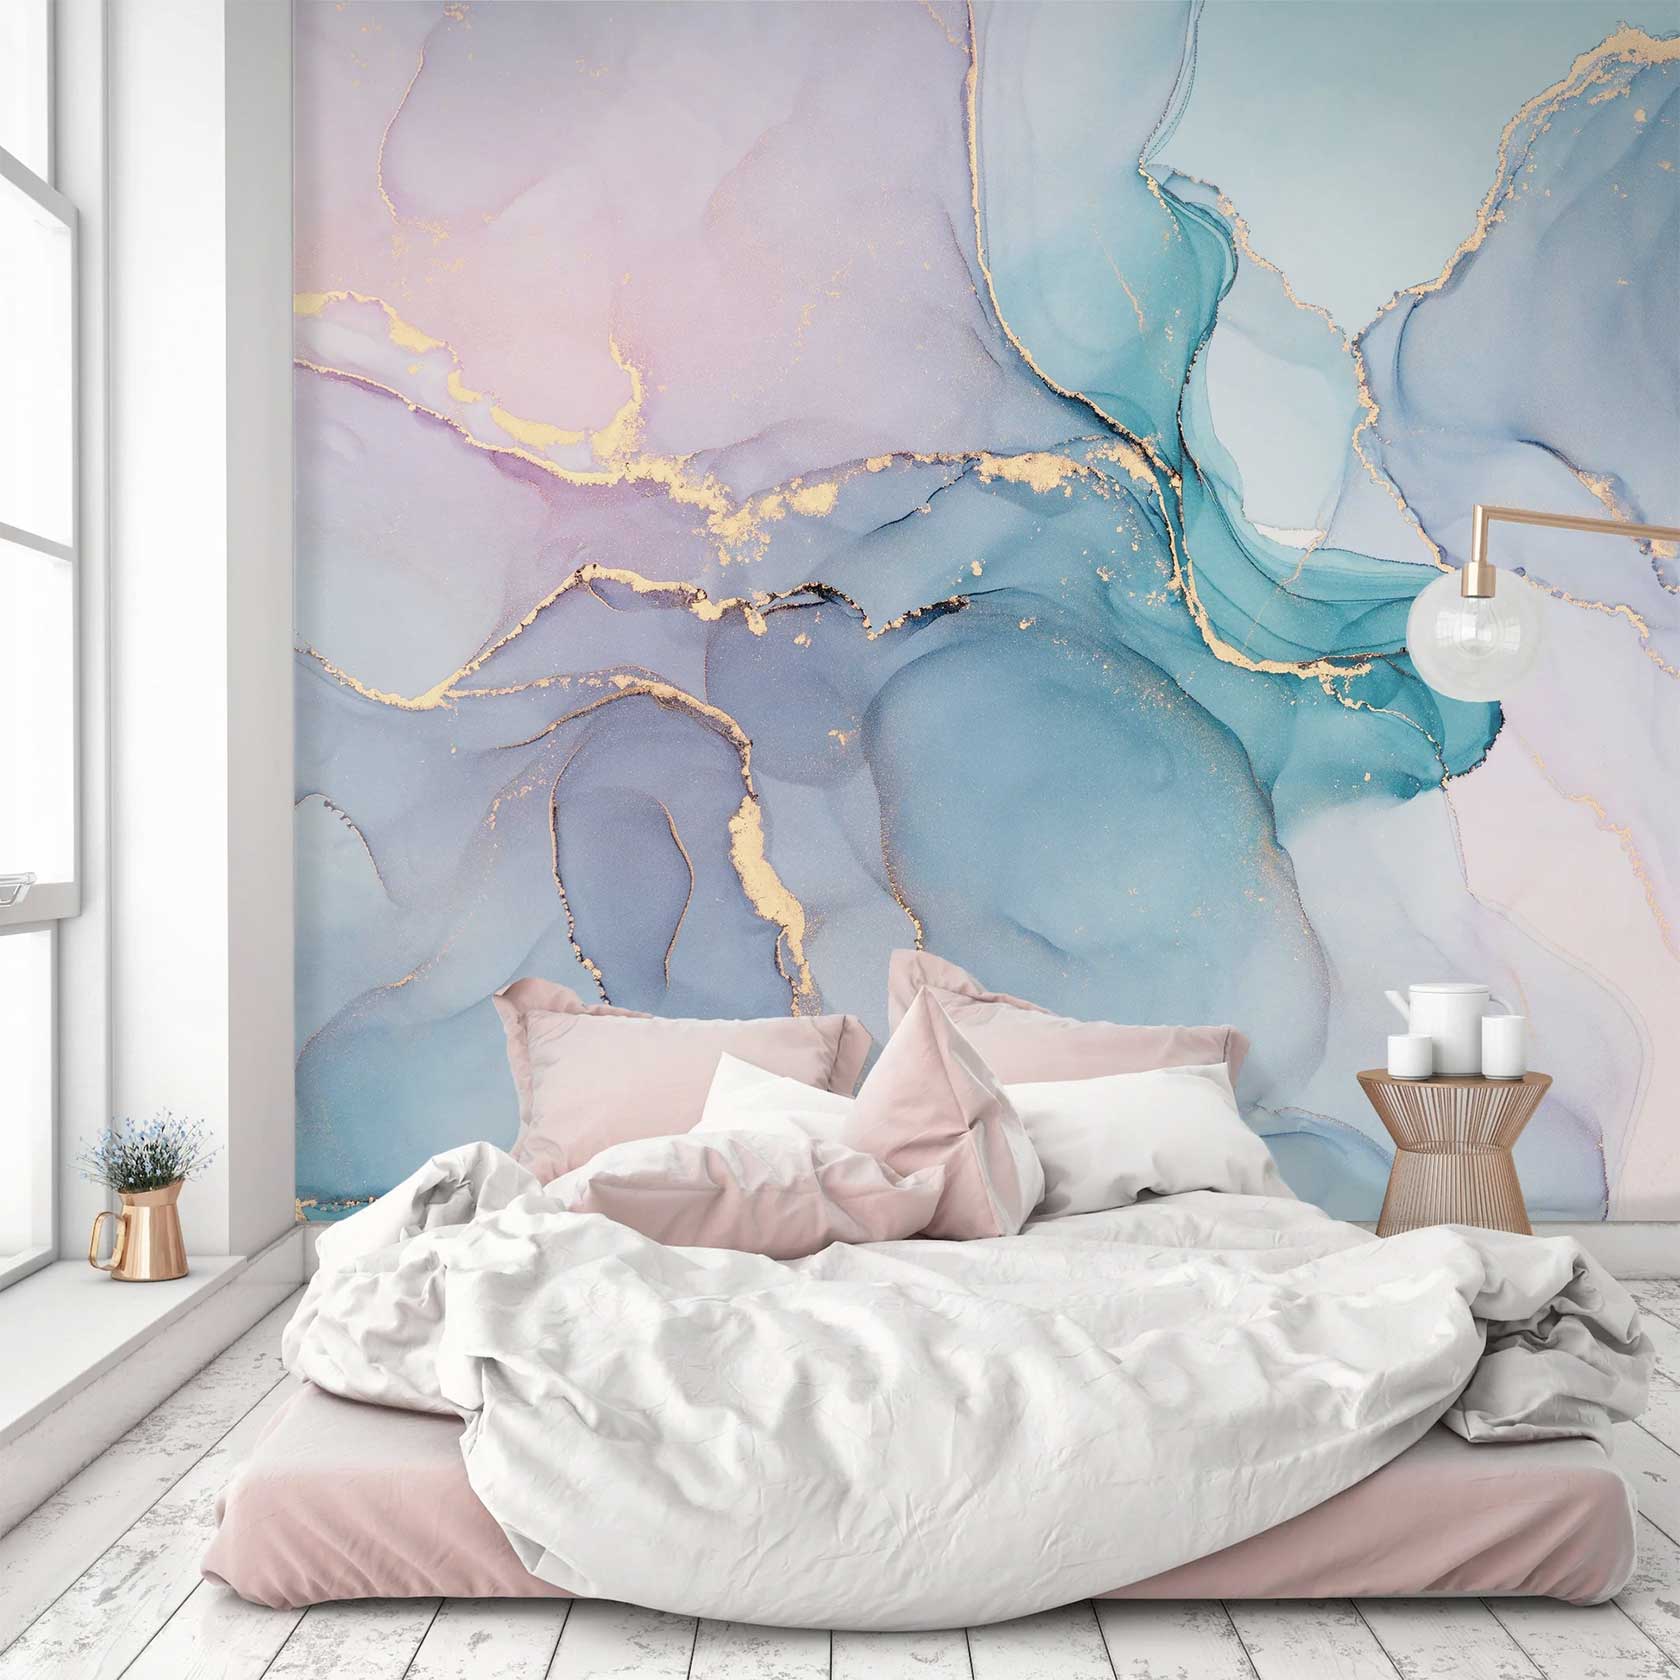 Wallpaper mural for your room